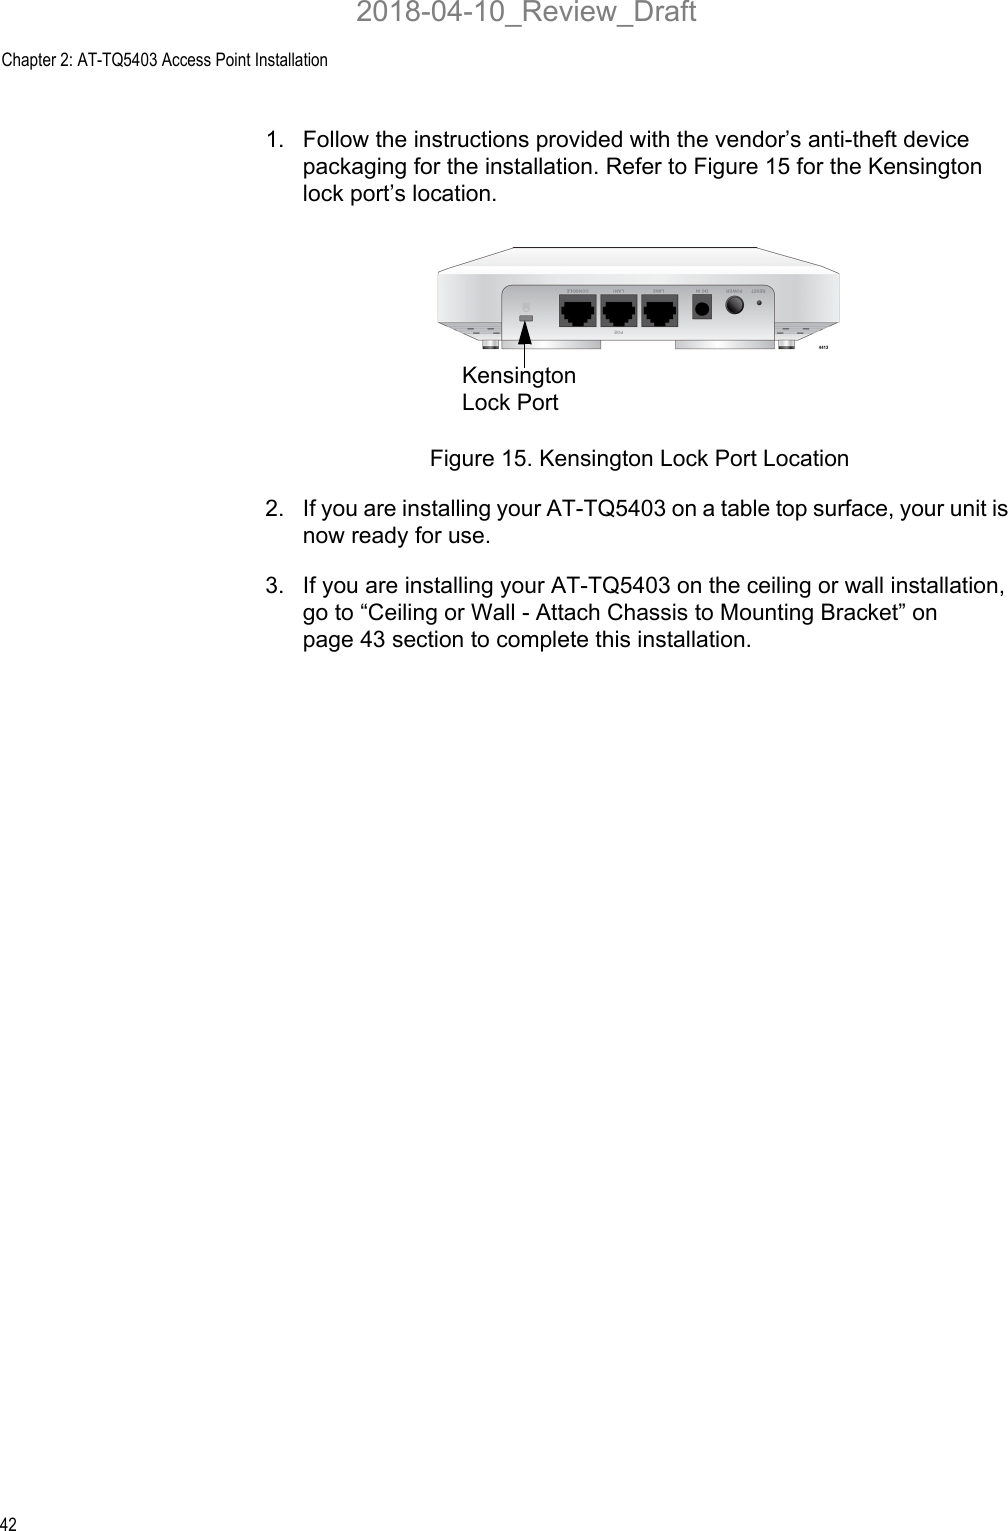 Chapter 2: AT-TQ5403 Access Point Installation421. Follow the instructions provided with the vendor’s anti-theft device packaging for the installation. Refer to Figure 15 for the Kensington lock port’s location.Figure 15. Kensington Lock Port Location2. If you are installing your AT-TQ5403 on a table top surface, your unit is now ready for use.3. If you are installing your AT-TQ5403 on the ceiling or wall installation, go to “Ceiling or Wall - Attach Chassis to Mounting Bracket” on page 43 section to complete this installation.Kensington Lock Port2018-04-10_Review_Draft